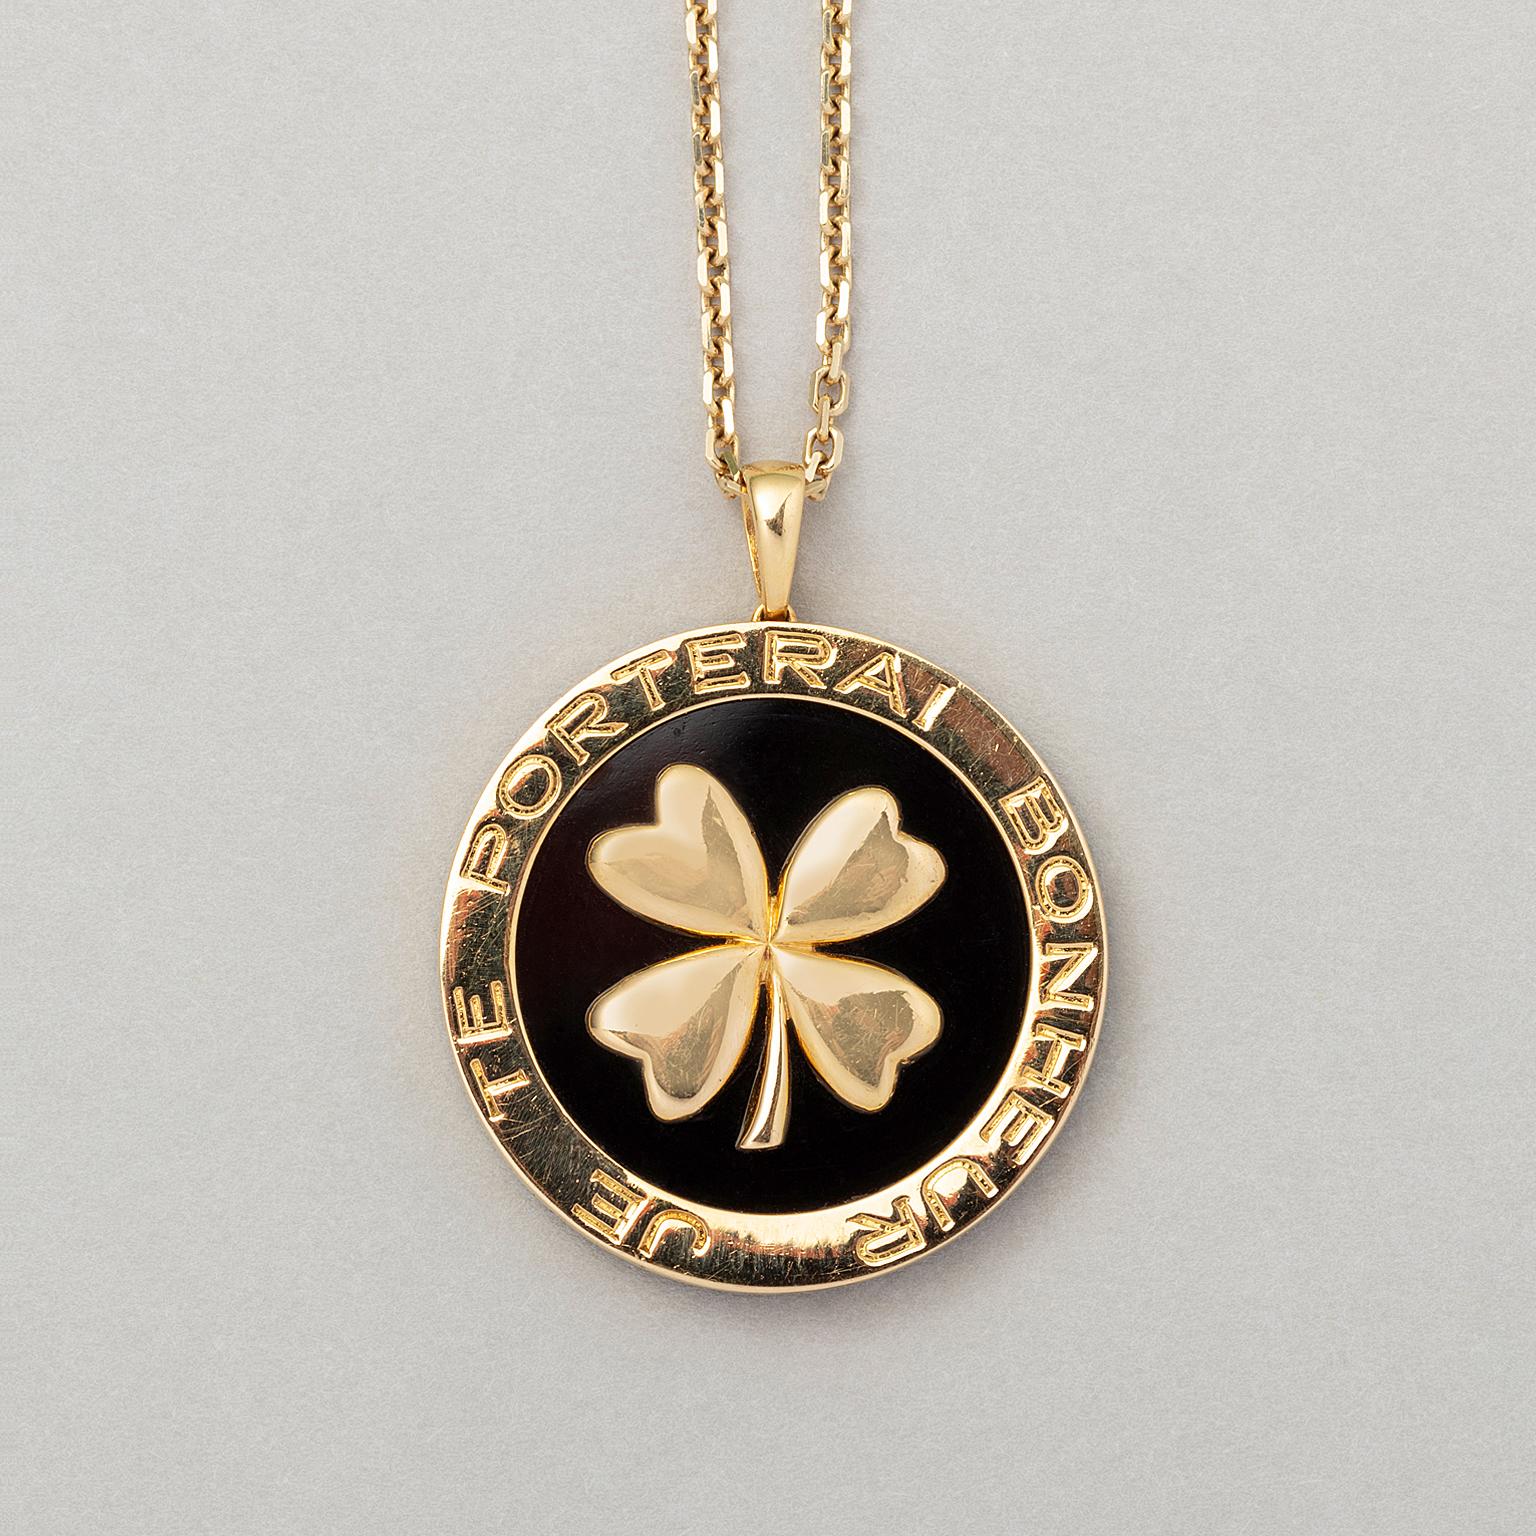 An 18 carat yellow gold round pendant with a lucky four-leaf clover set on black agate. On the border it says 'je te porterai bonheur' which means 'I will bring you happiness'. Signed and numbered: Van Cleef & Arpels, B1298X5. The pendant includes a